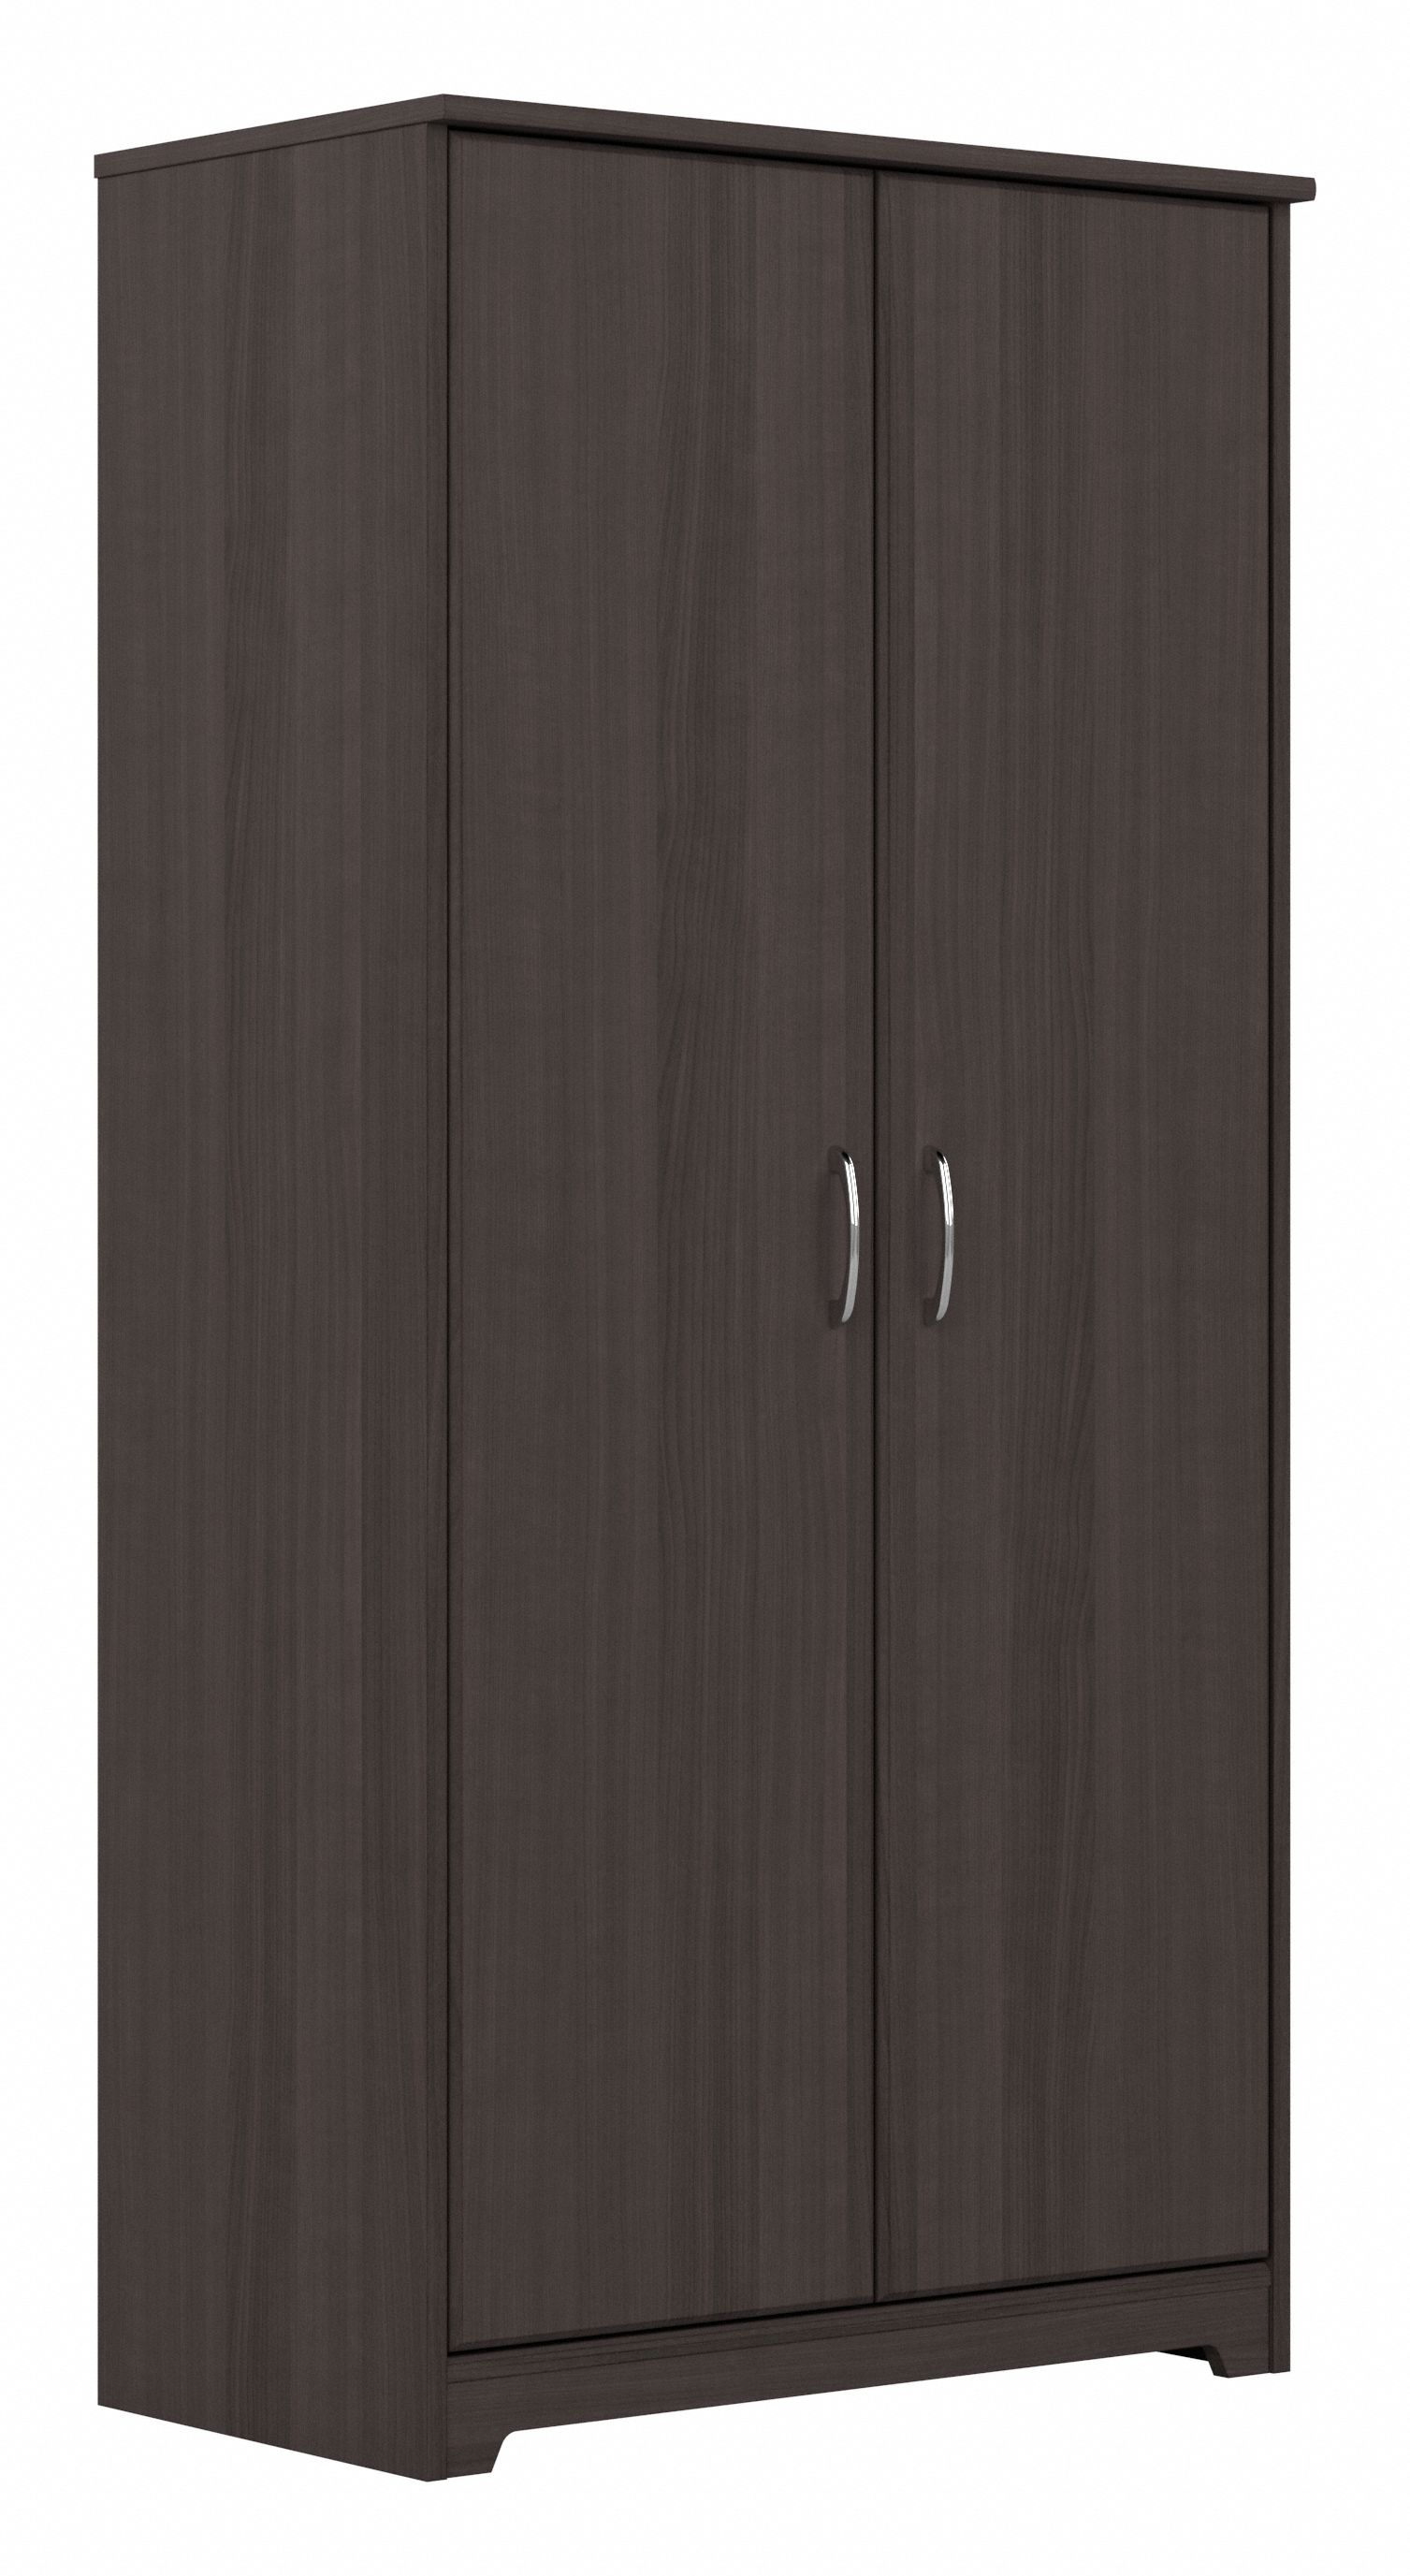 Shop Bush Furniture Cabot Tall Storage Cabinet with Doors 02 WC31799 #color_heather gray